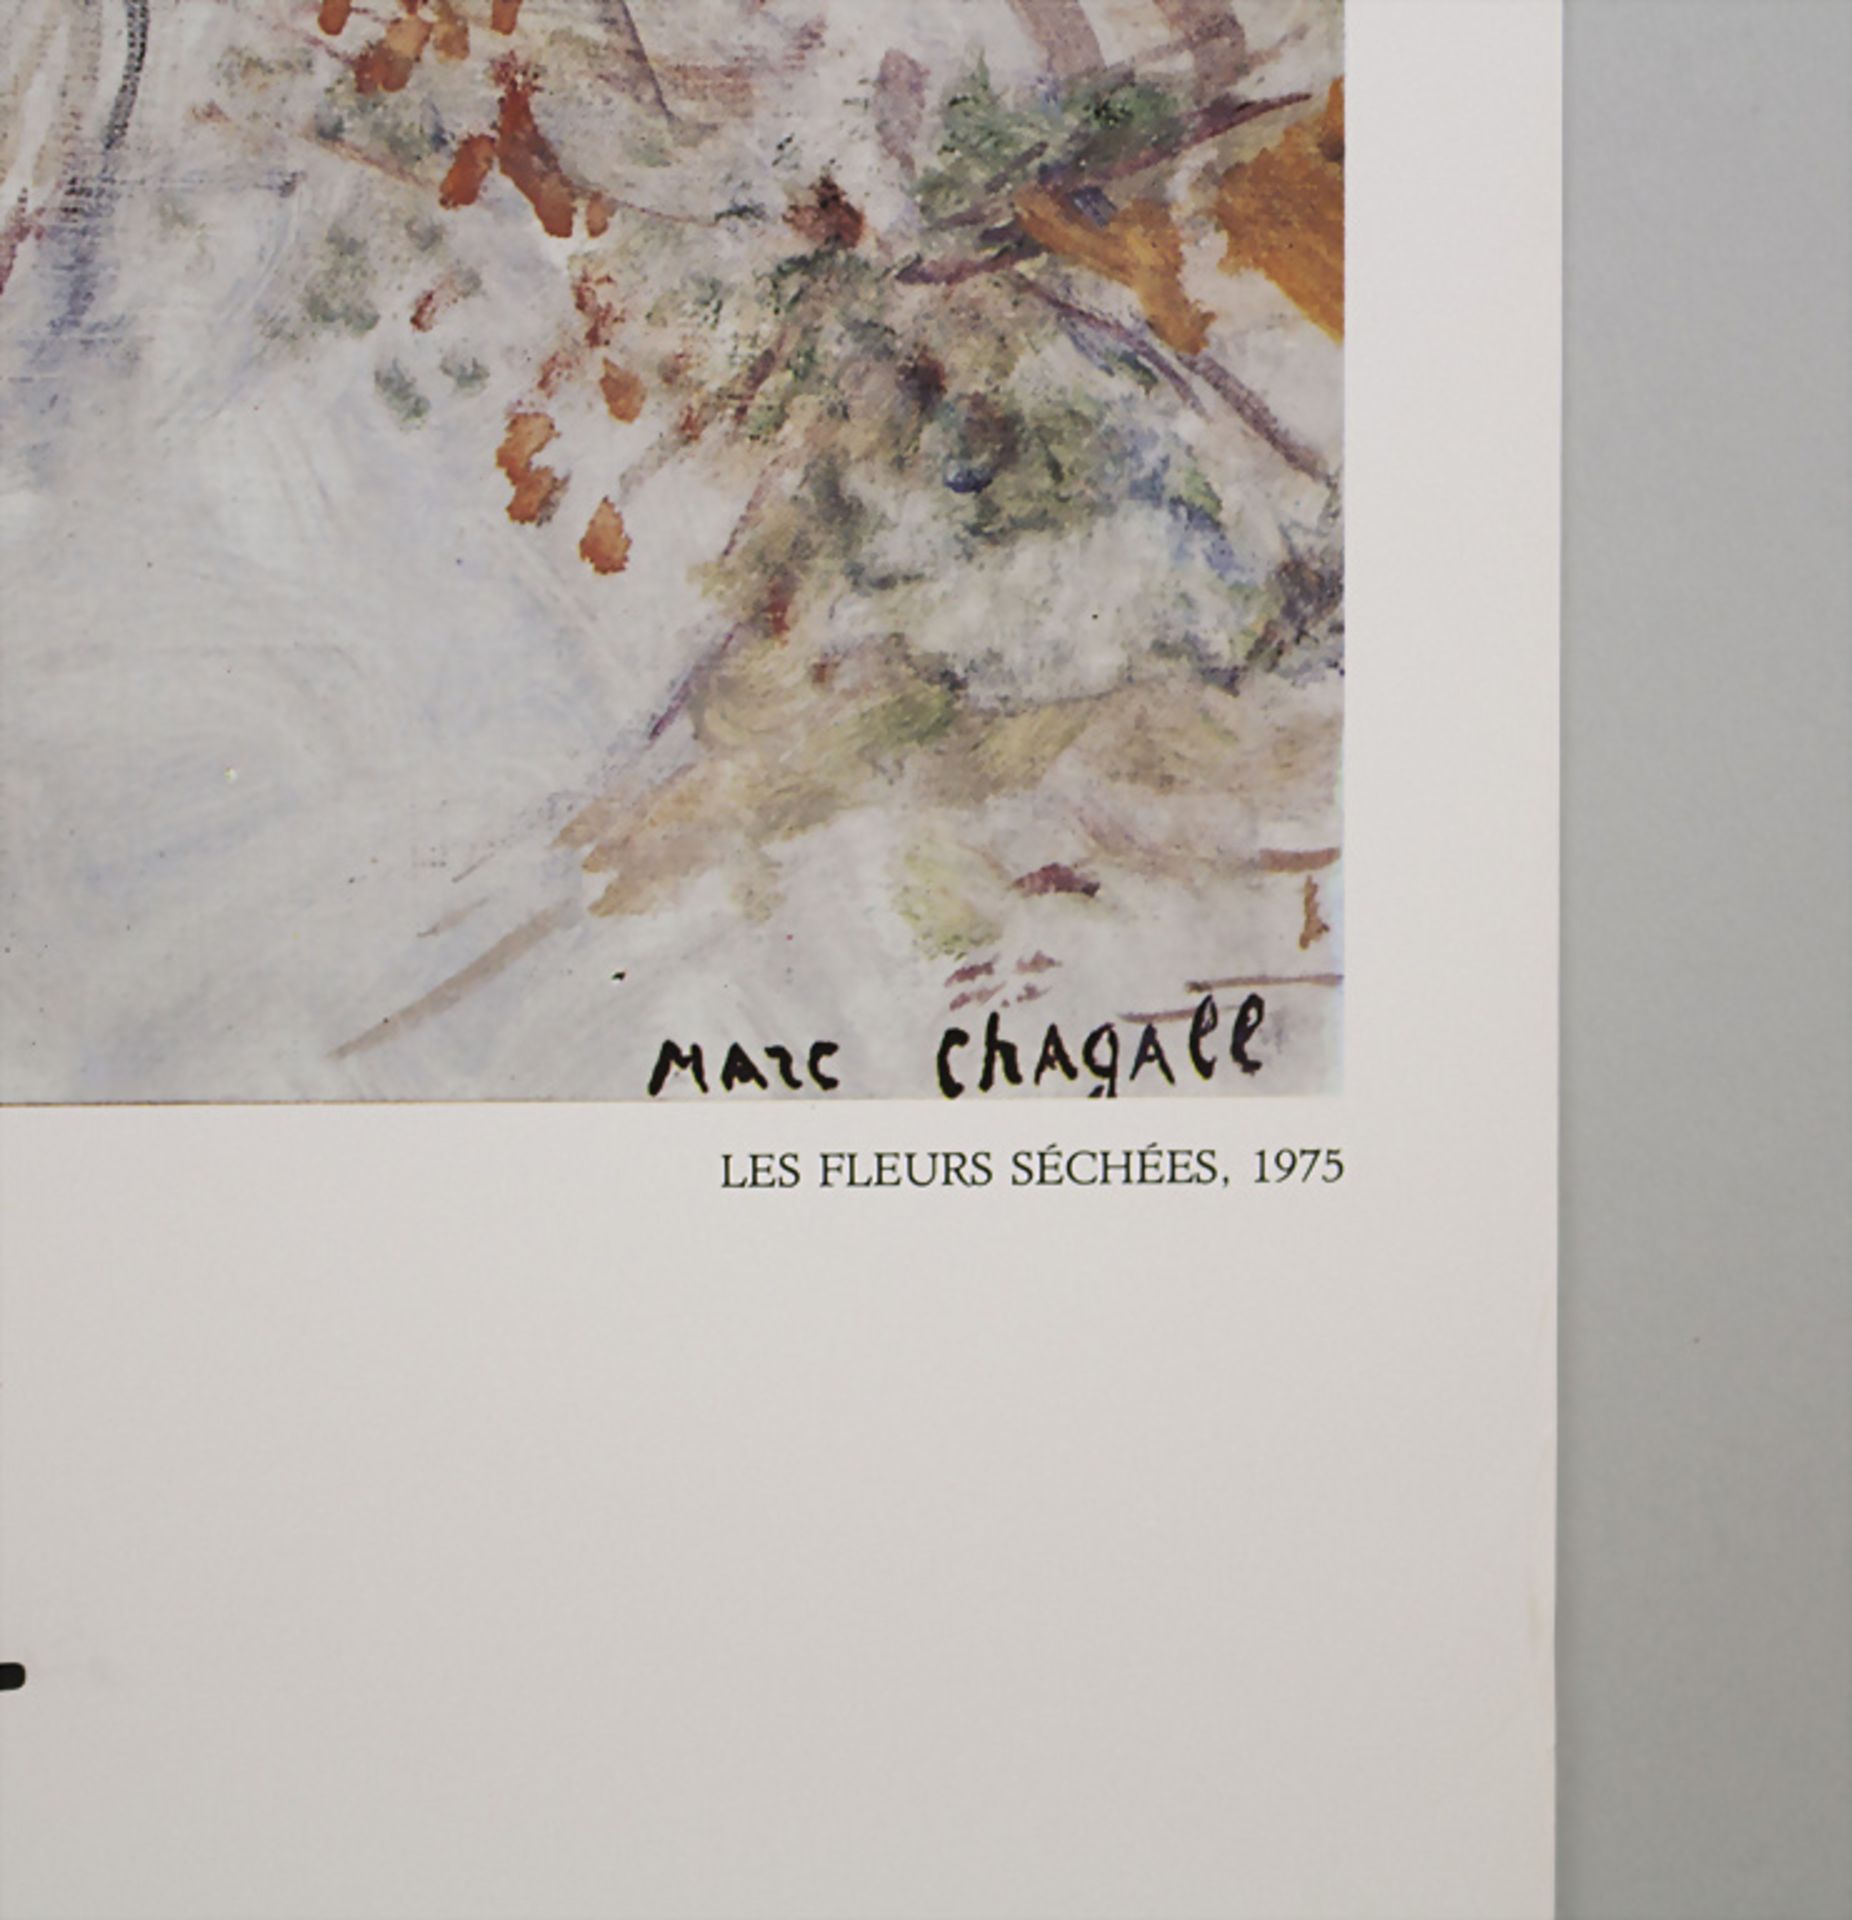 Marc CHAGALL (1887-1985), Ausstellungsplakat / Exhibition poster, Galerie Maeght, 1987 - Image 2 of 3